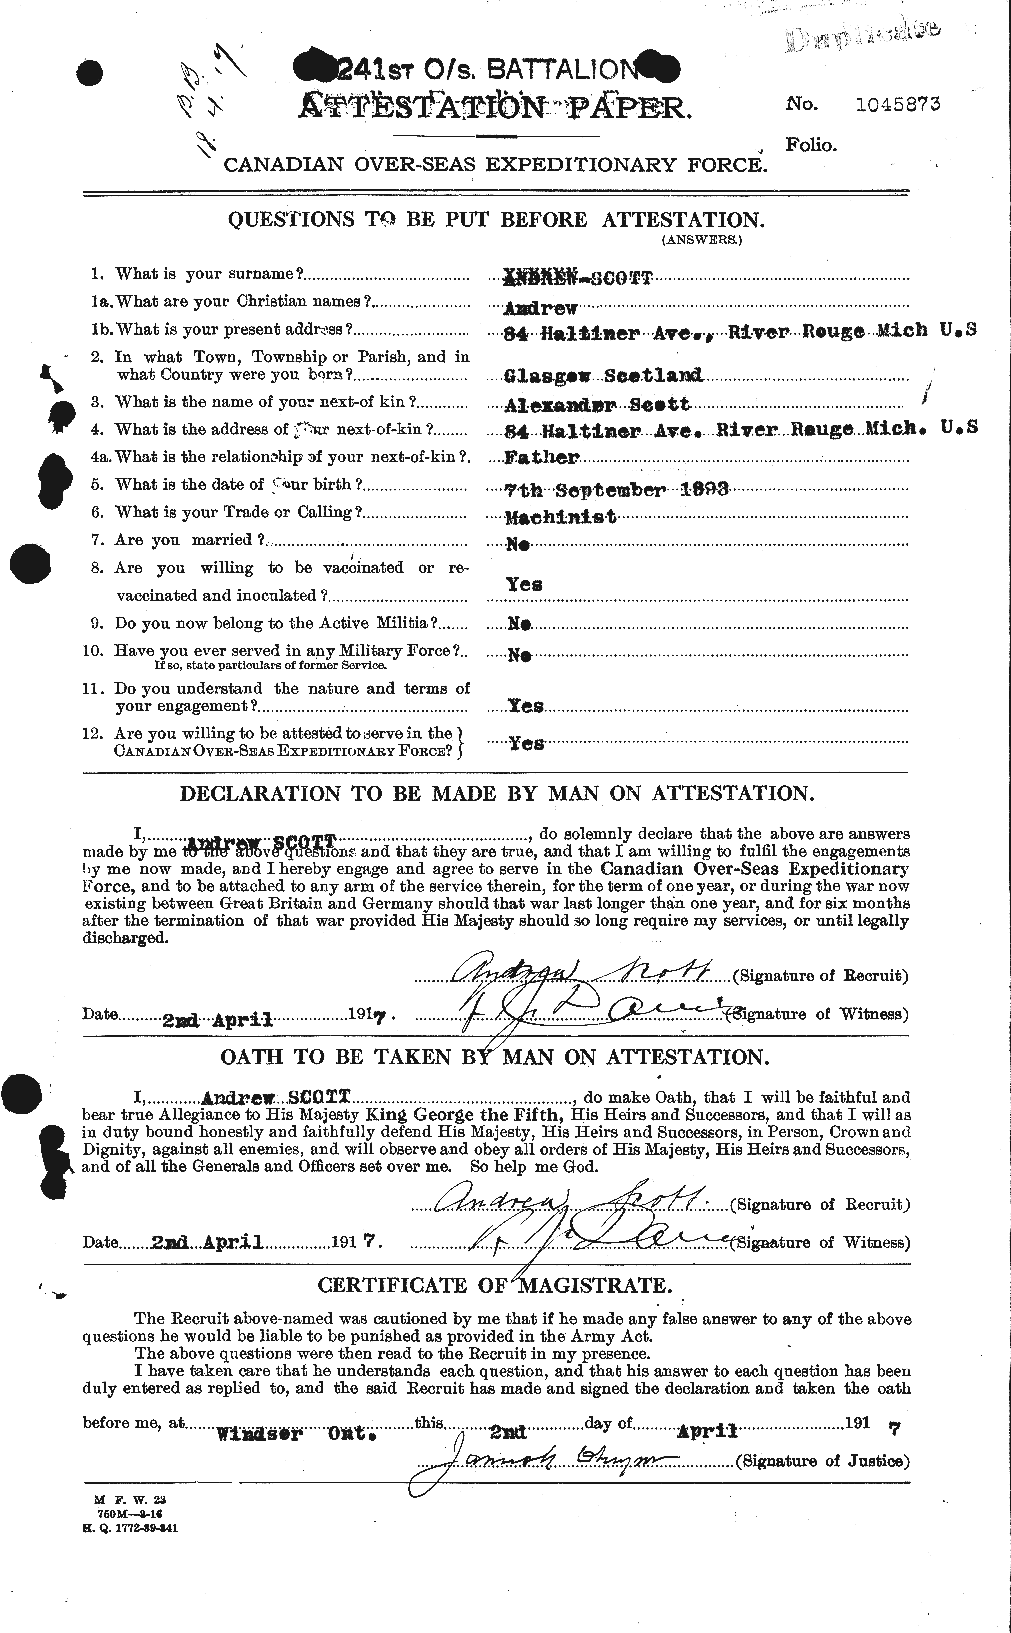 Personnel Records of the First World War - CEF 086450a